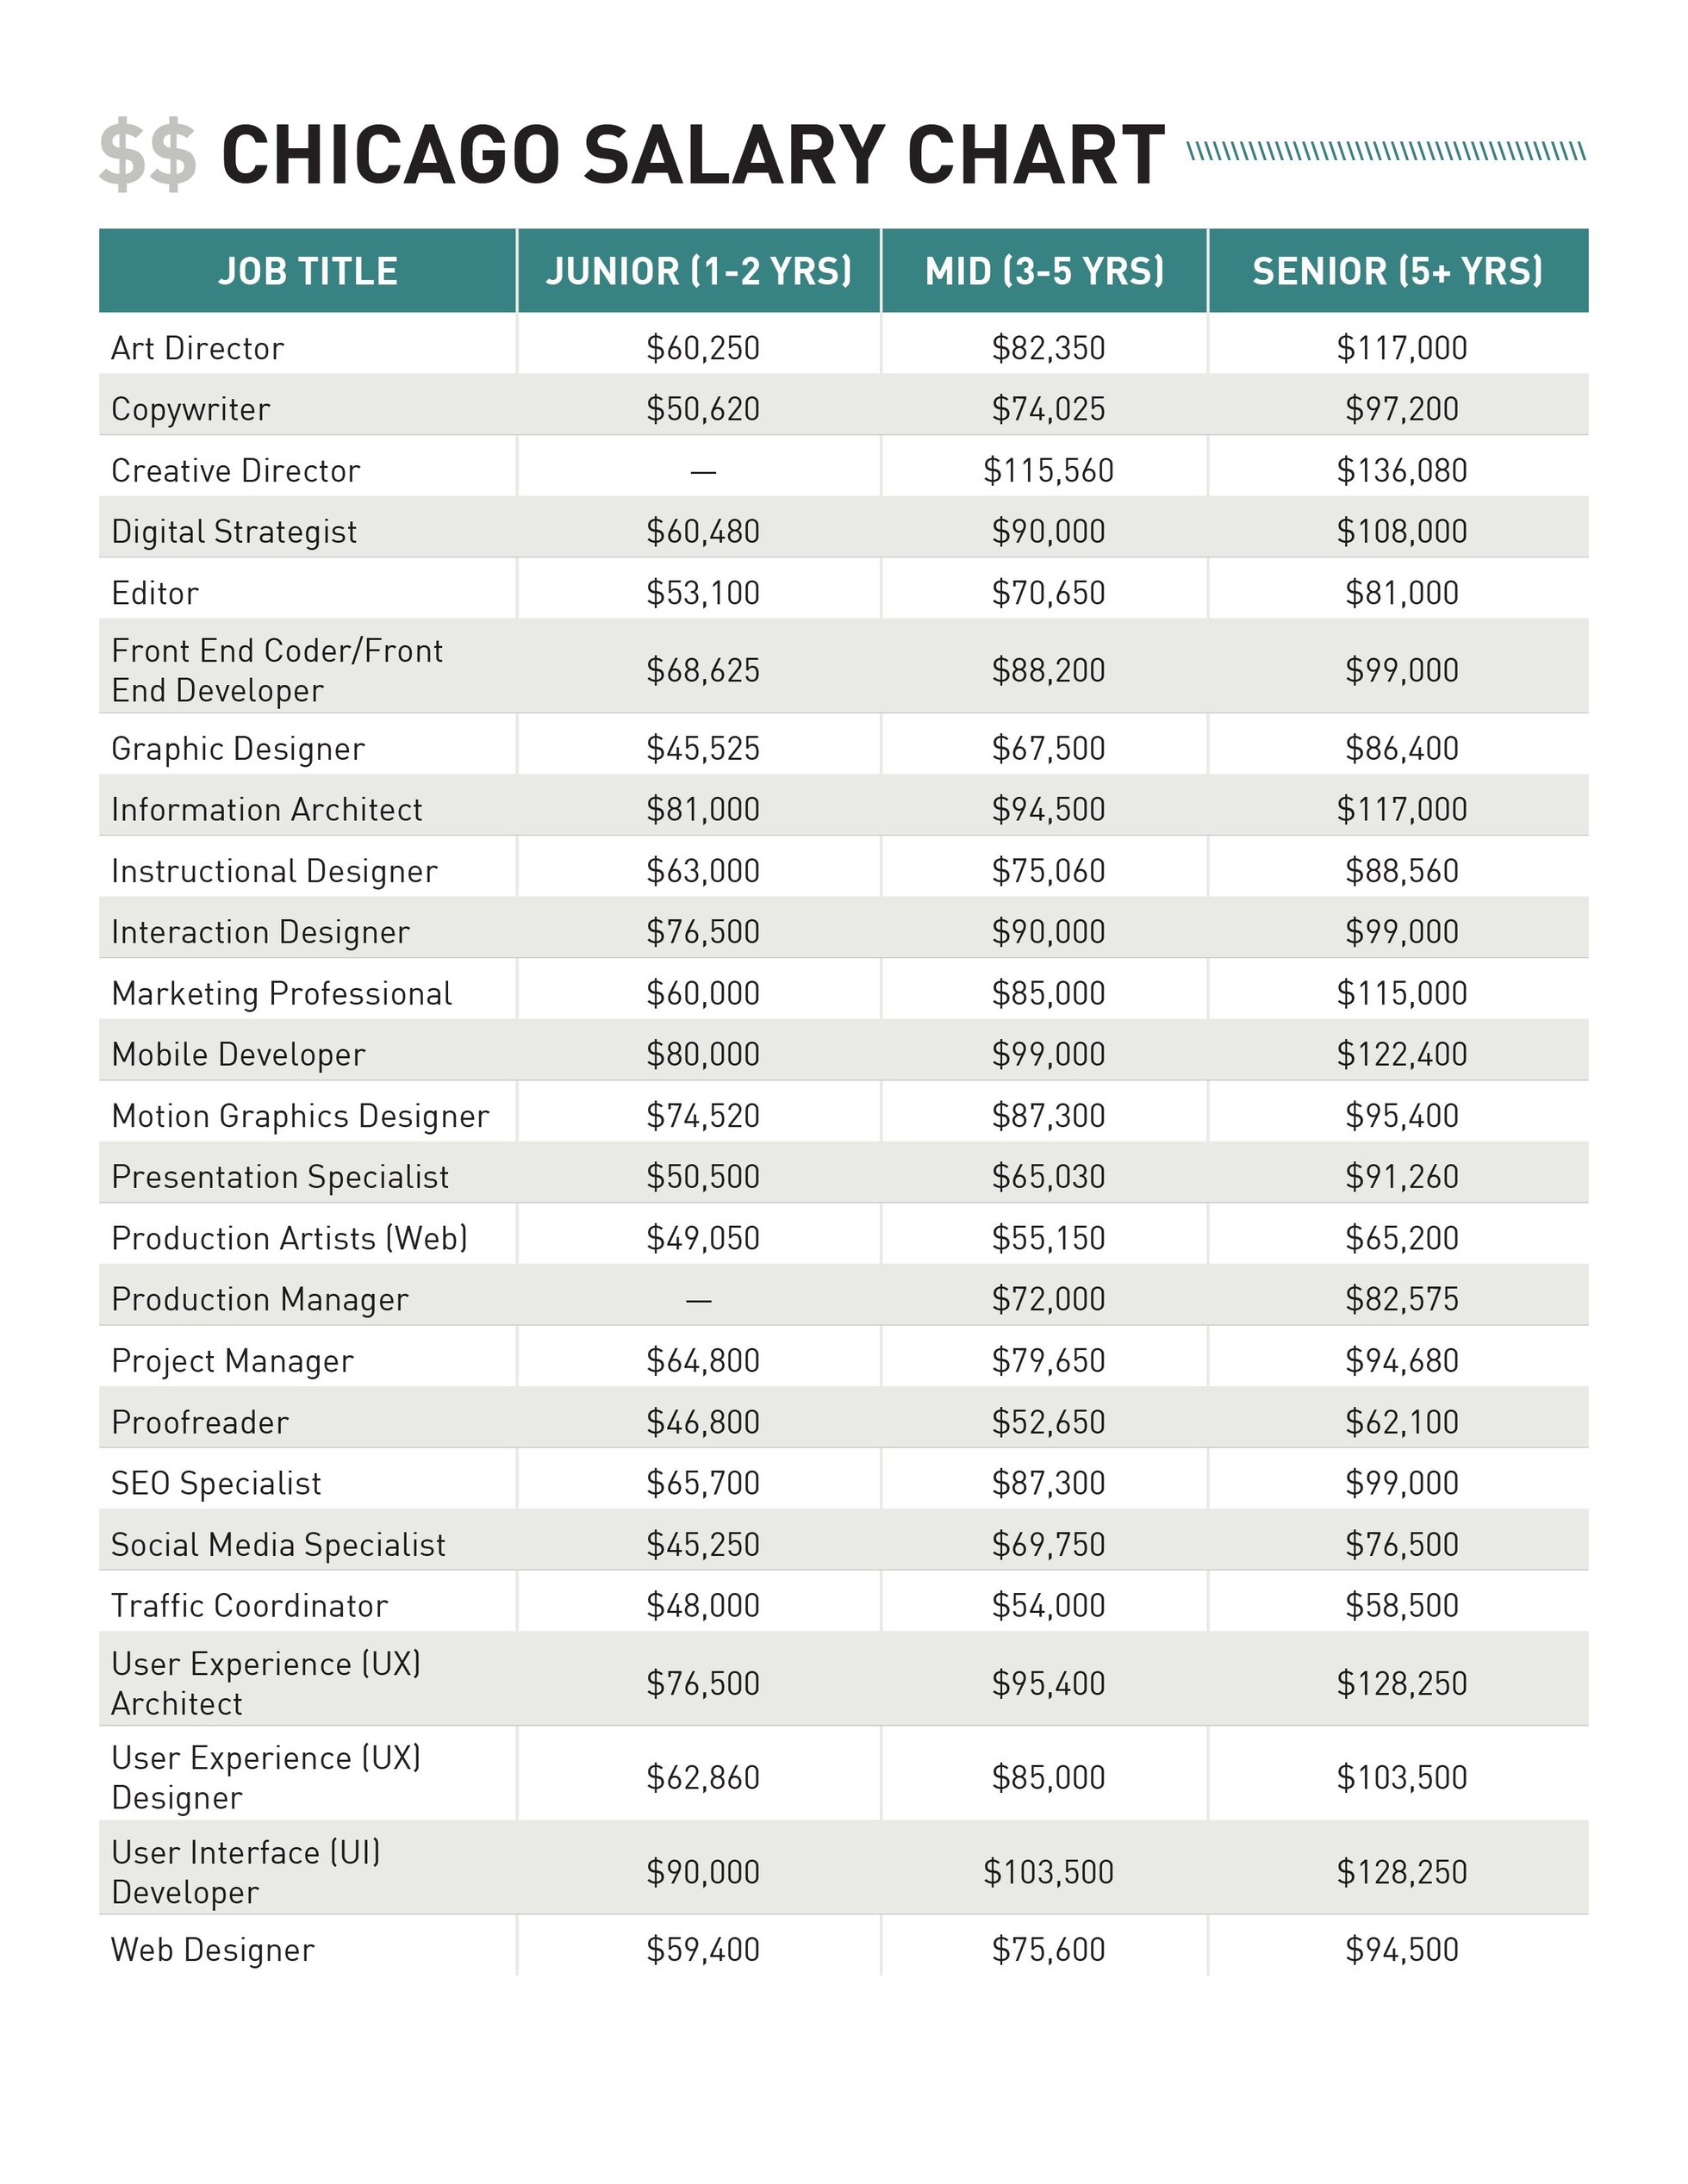 Chicago Salaries Does Your Pay Stack Up?